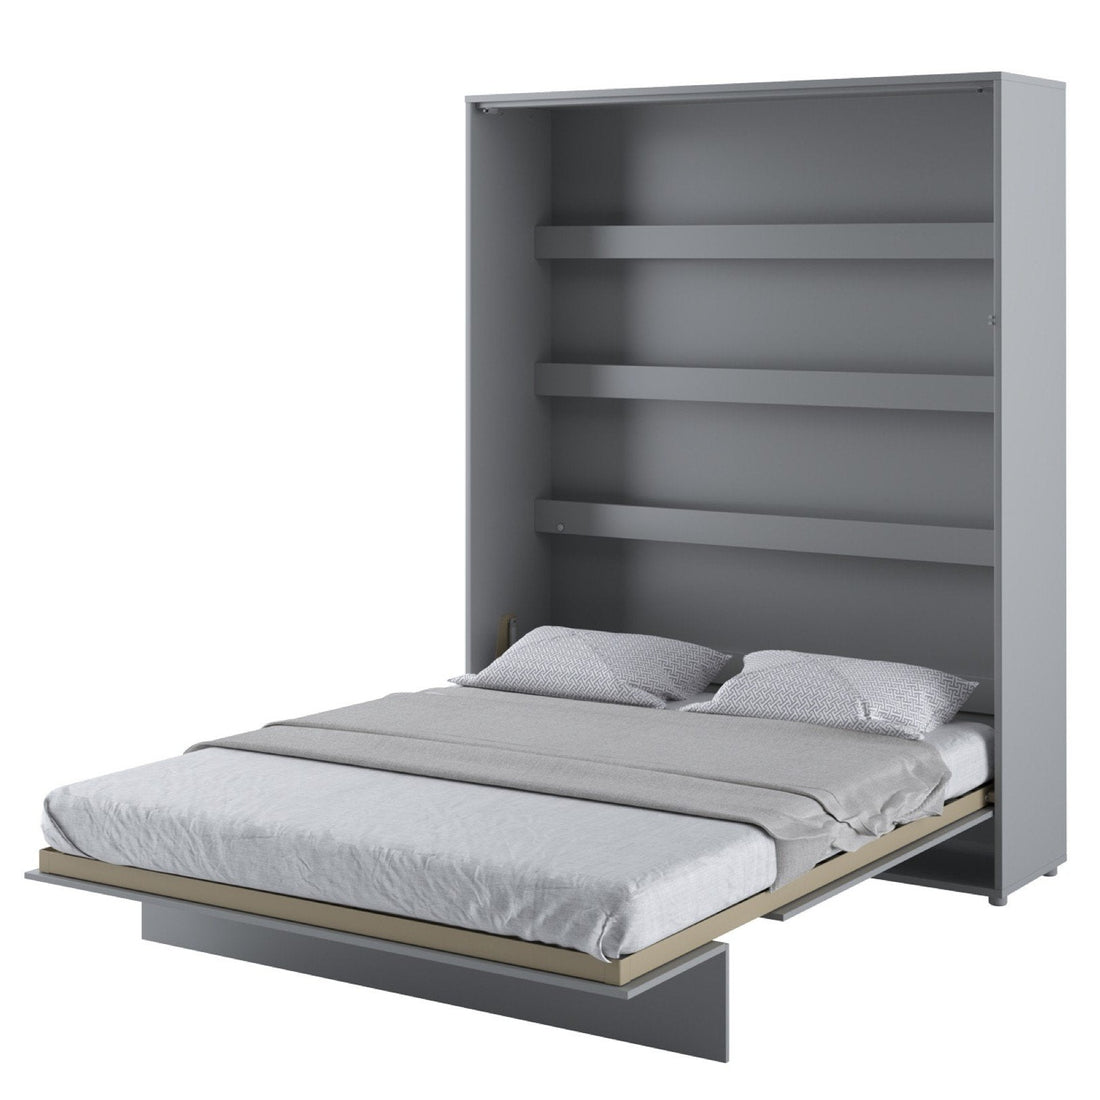 BC-13 Vertical Wall Bed Concept 180cm - £1022.4 - Wall Bed 